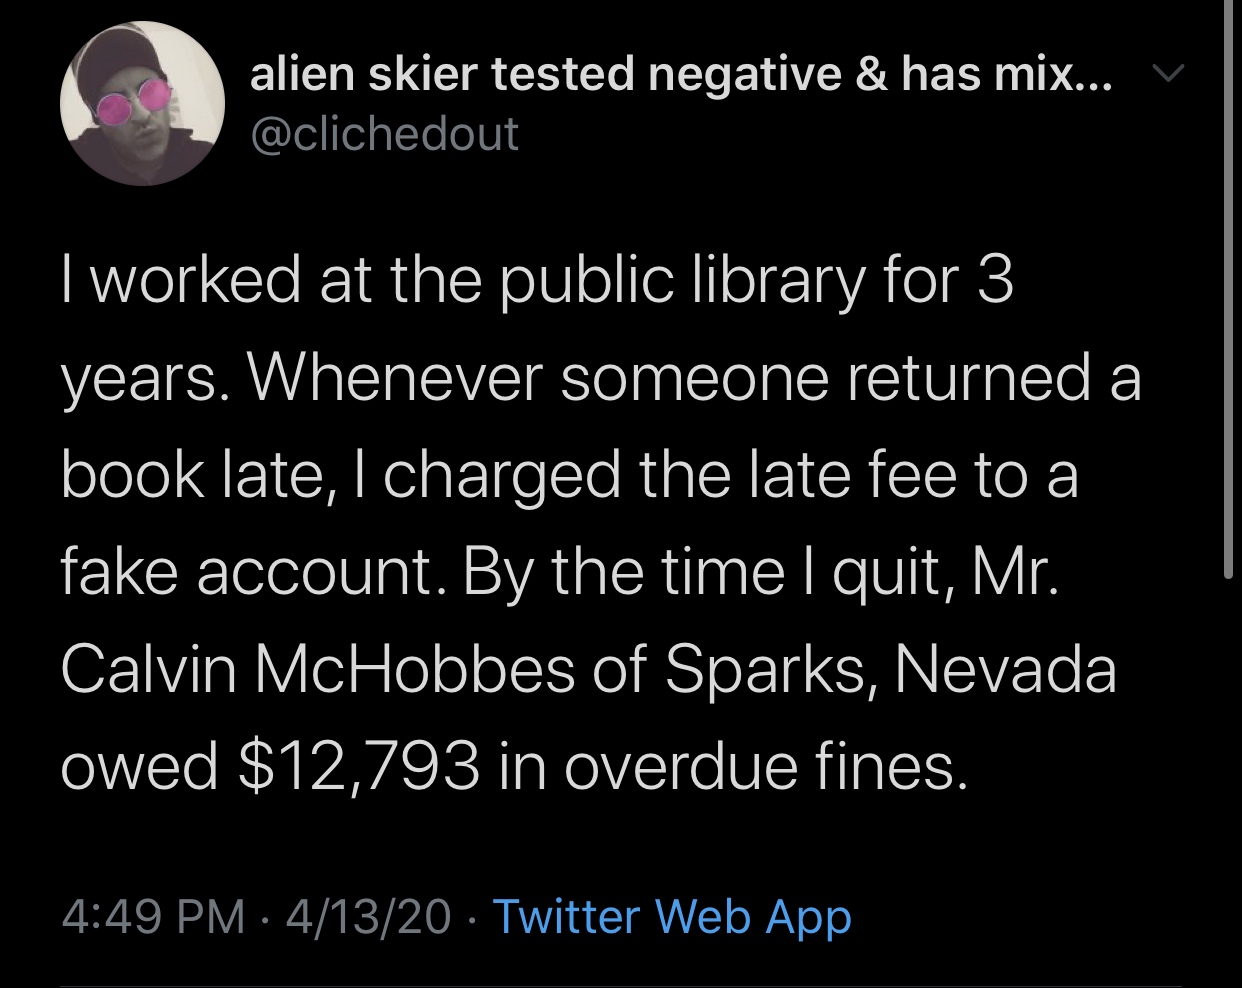 funny memes and tweets - atmosphere - alien skier tested negative & has mix... V I worked at the public library for 3 years. Whenever someone returned a book late, I charged the late fee to a fake account. By the time I quit, Mr. Calvin McHobbes of Sparks